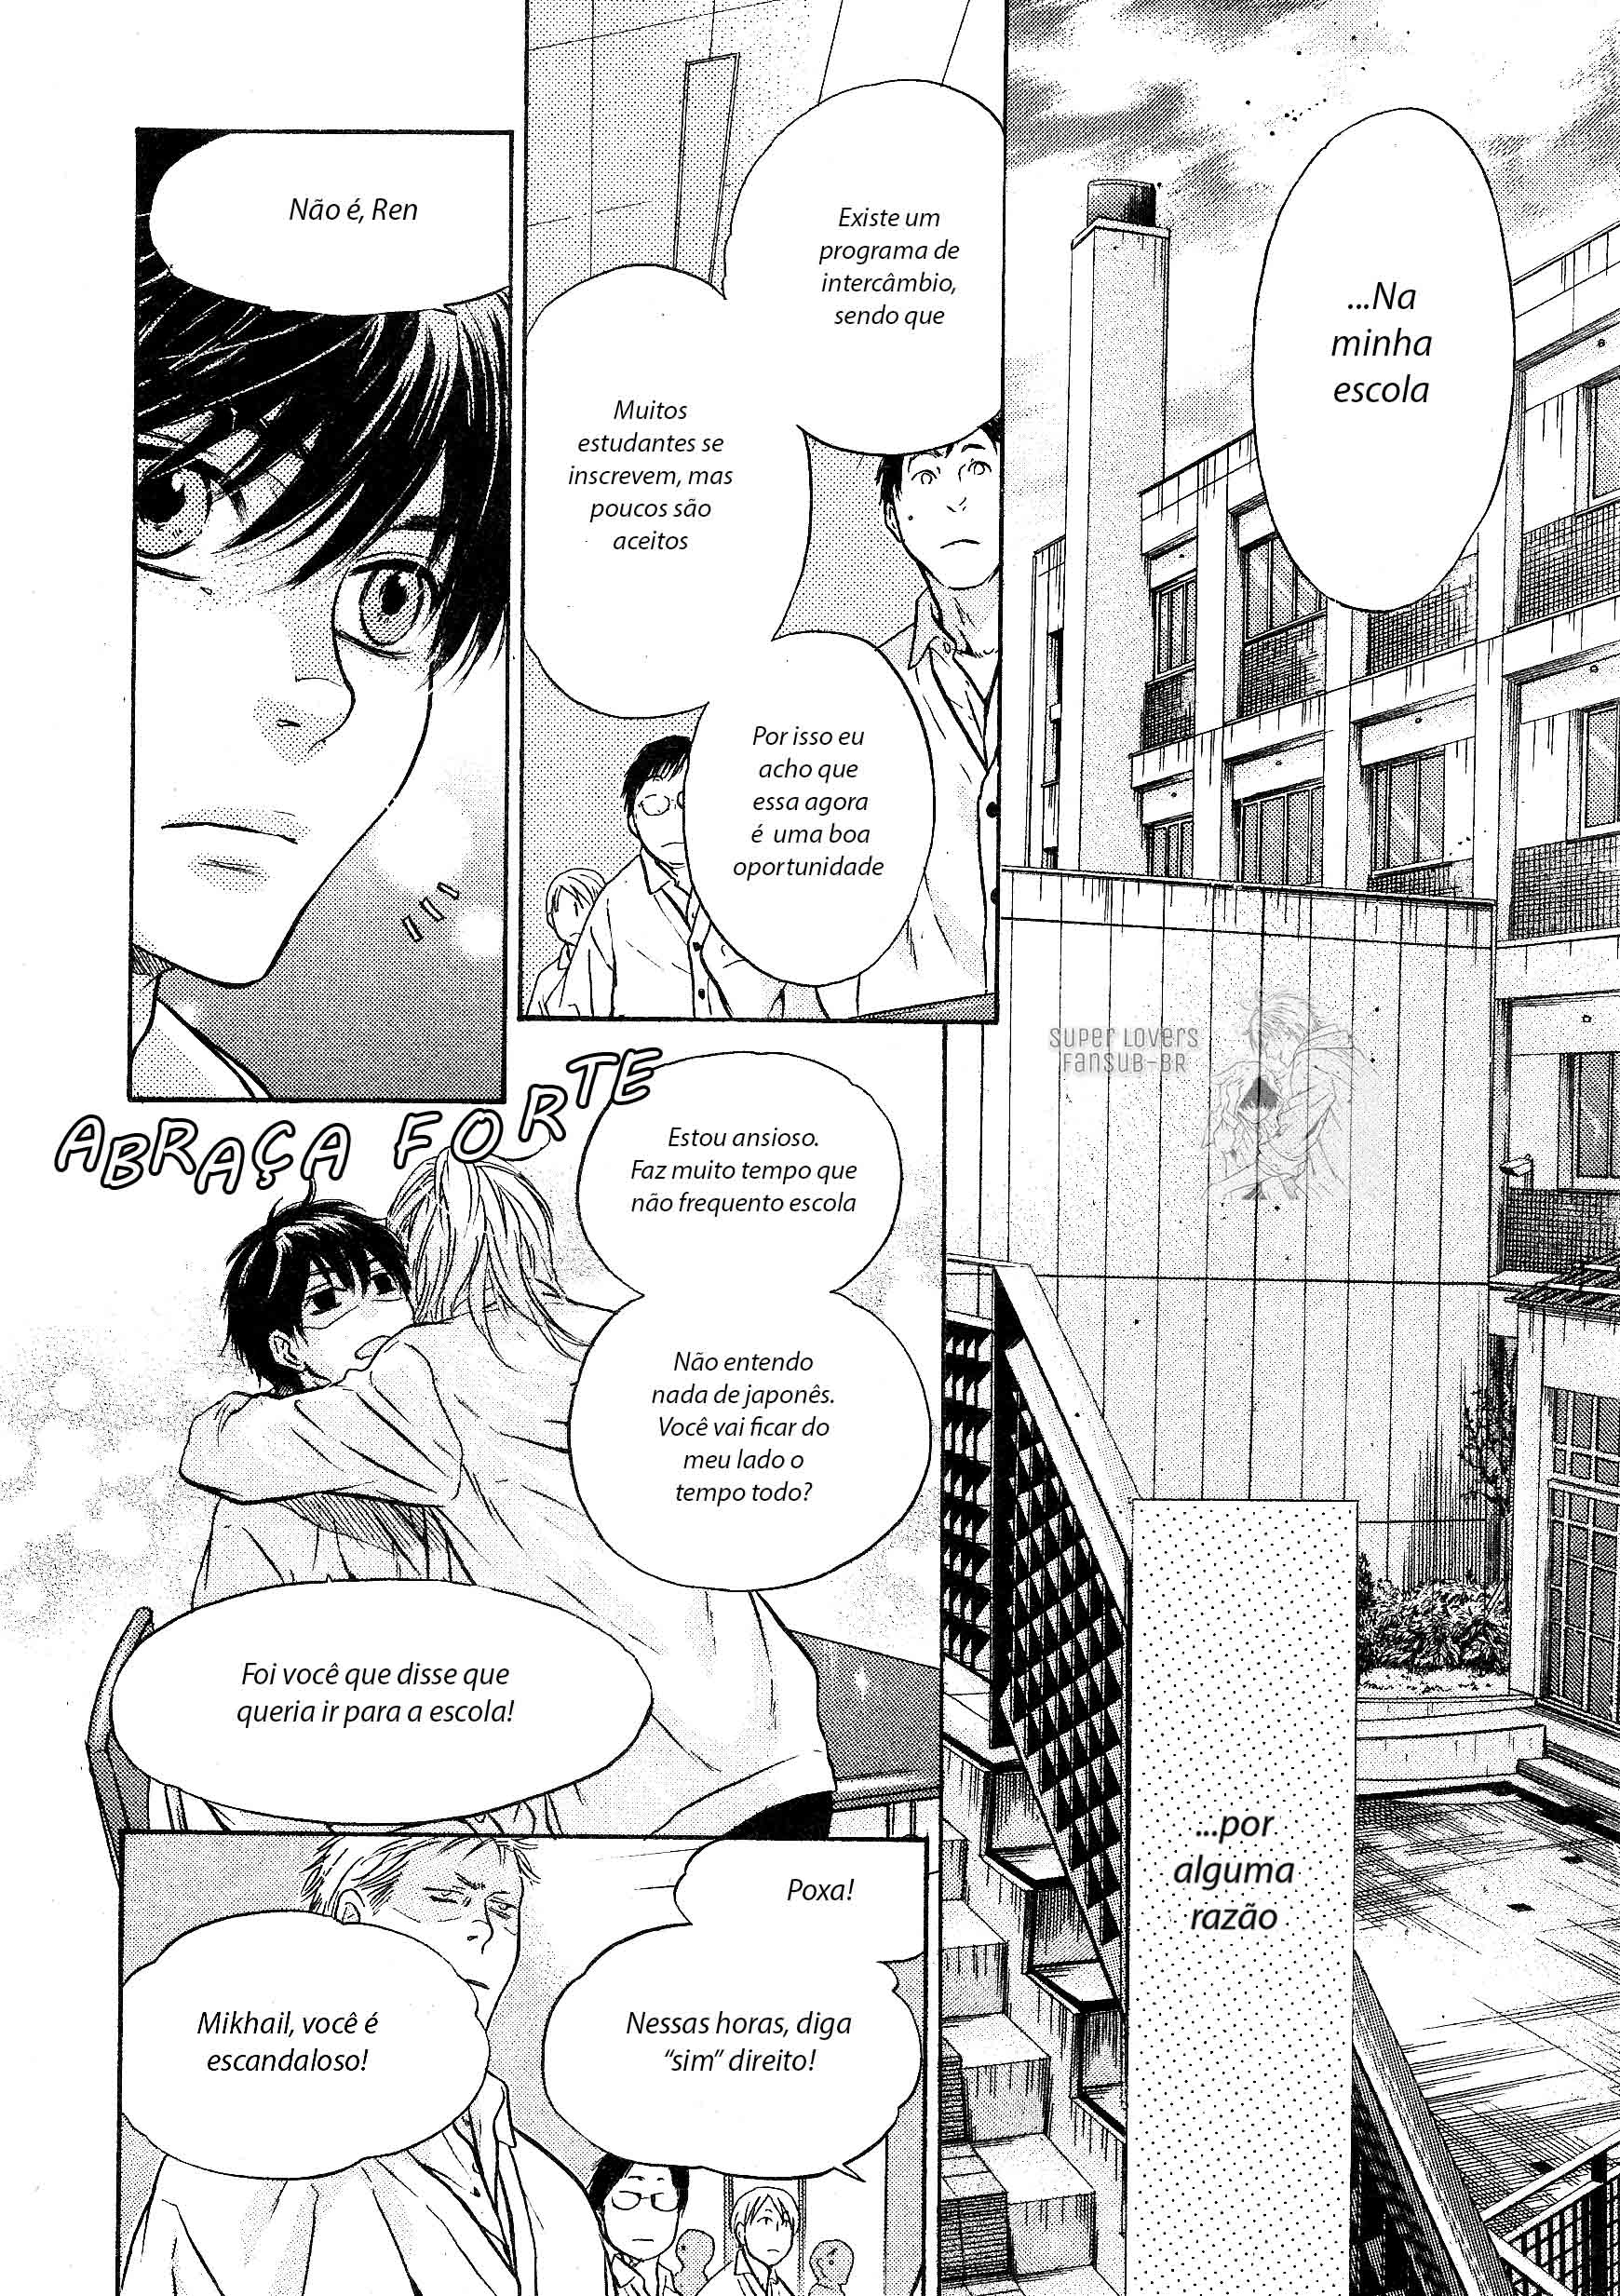 Super Lovers Fansub Br Capitulo 41